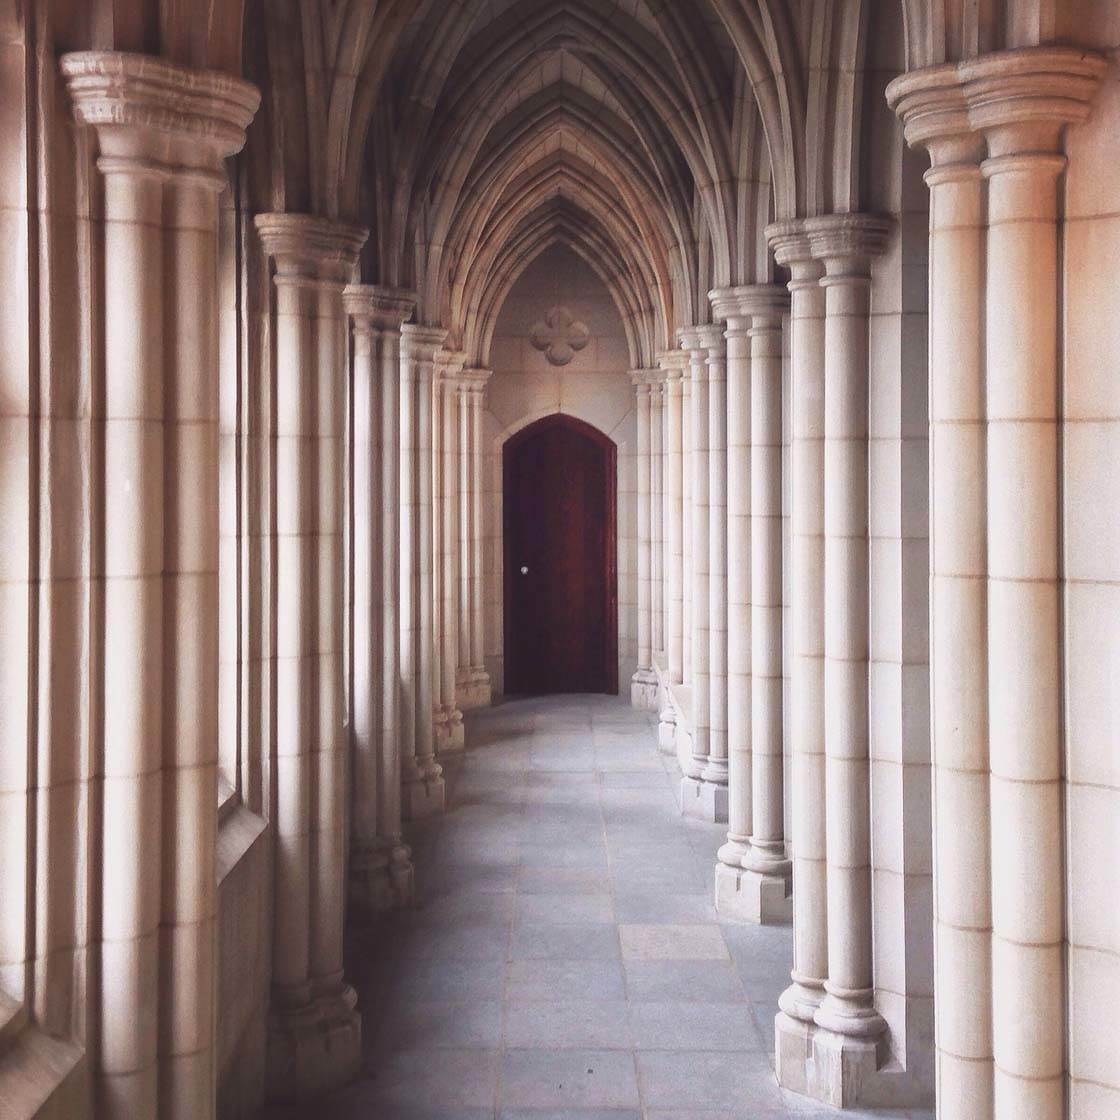 The iconic cloister at the University of Virginia. - Architecture